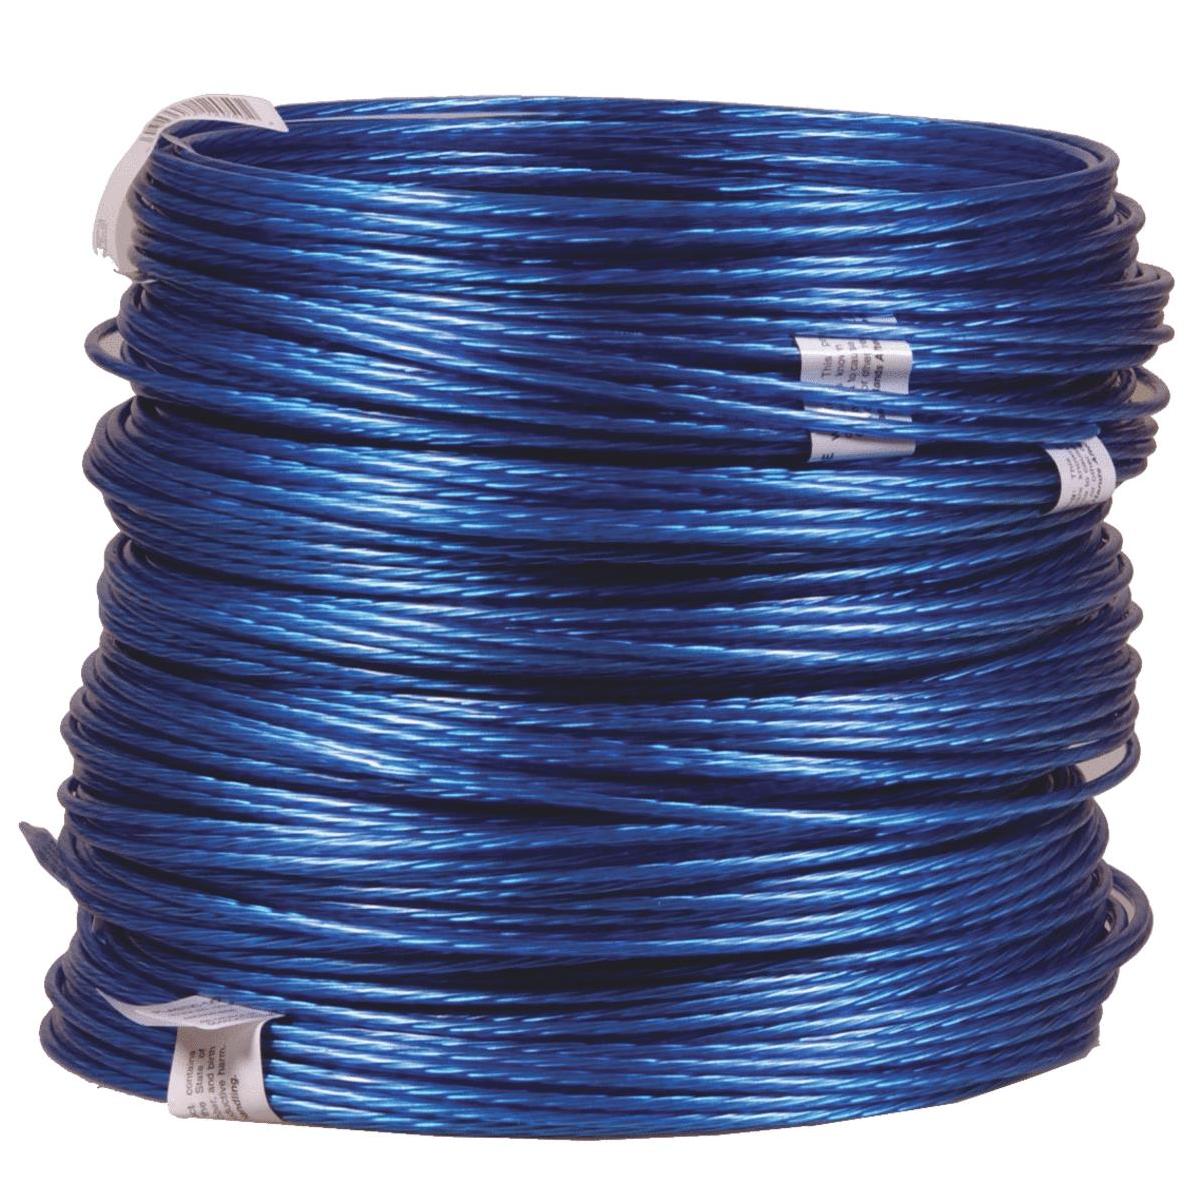 Hillman 123188 50 ft. Plastic Coated Wire